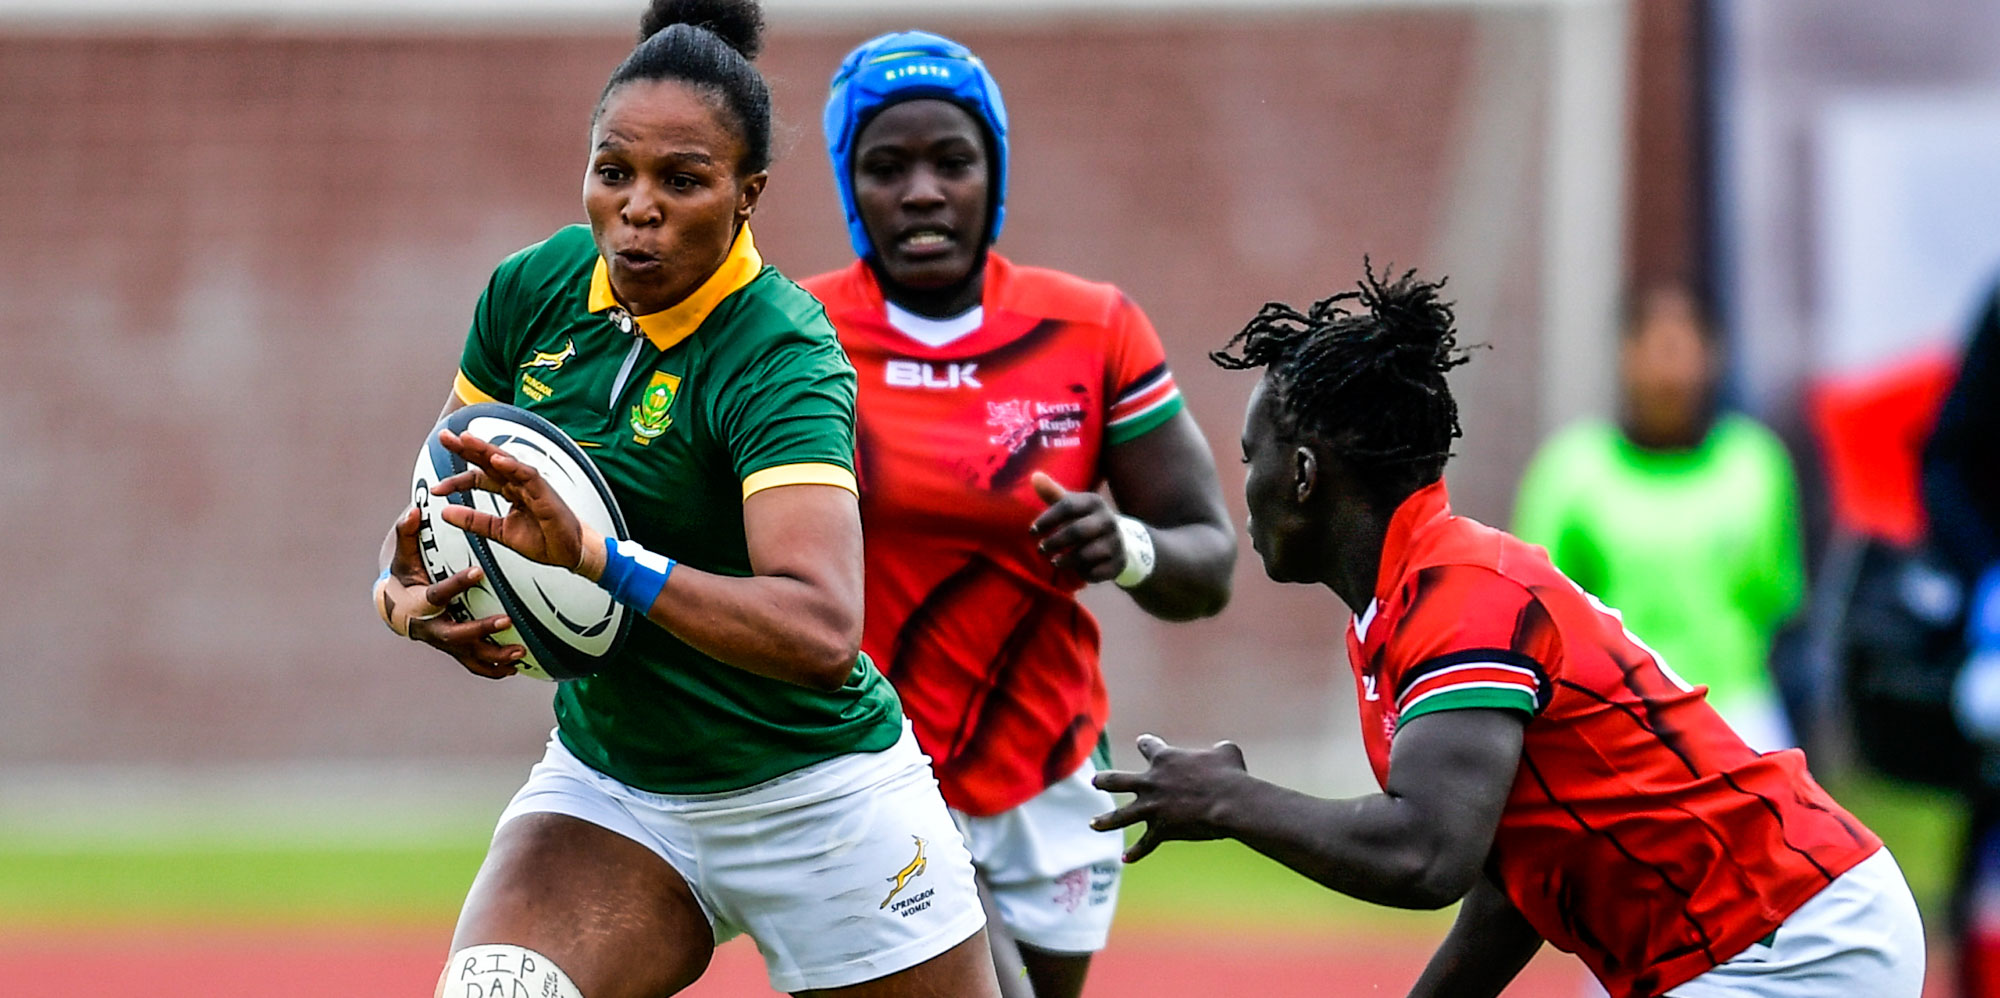 Unathi Mali celebrated her Test debut with a try against Kenya.